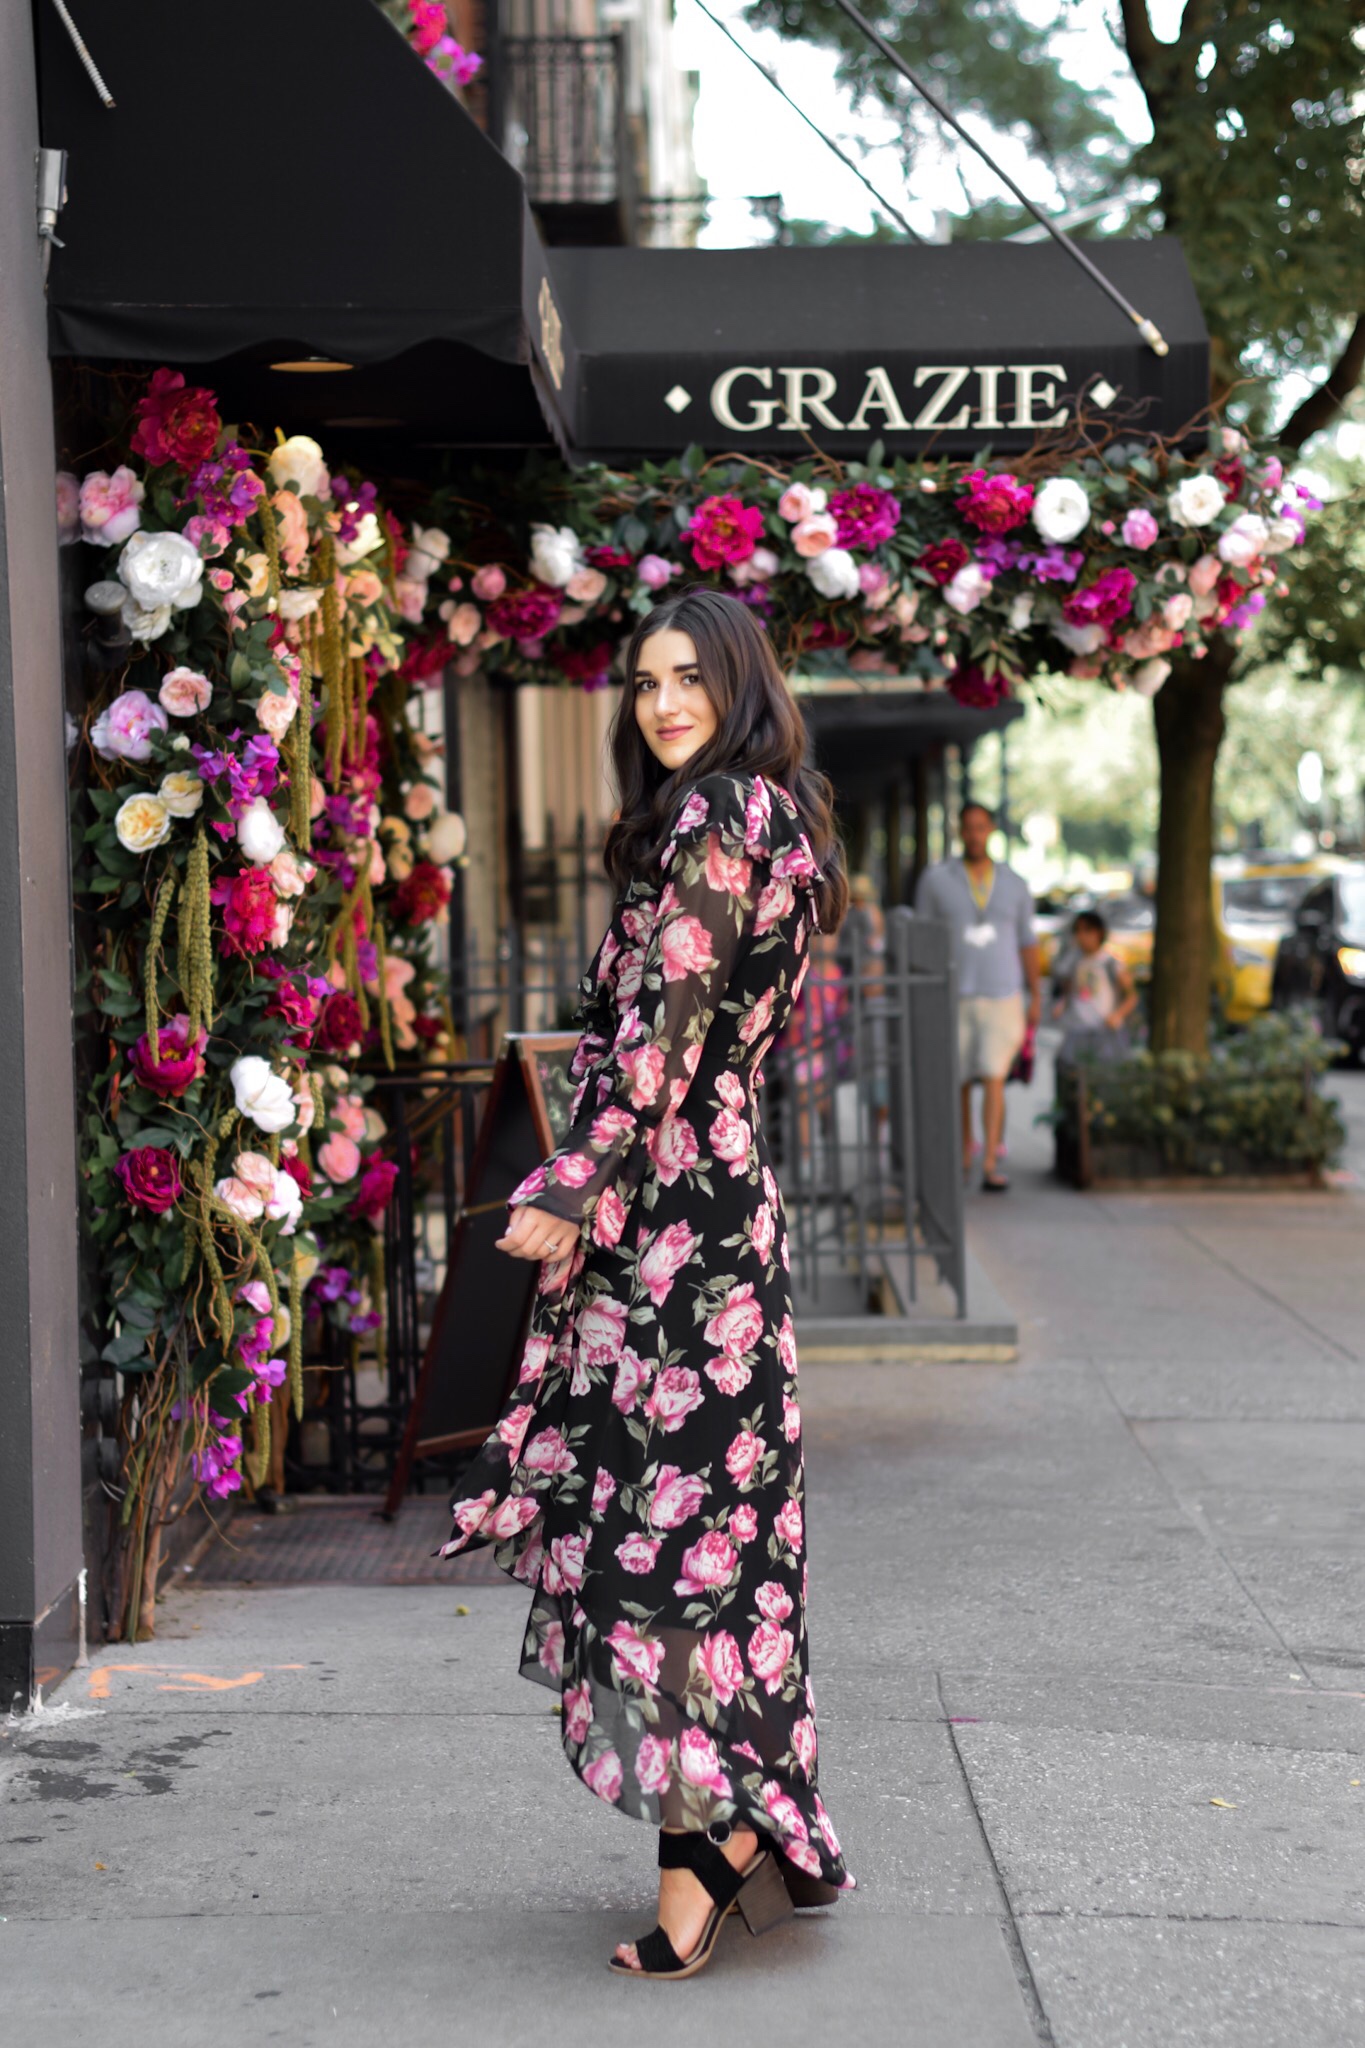 Why I'll Be Sitting Out My 11th Season Of NYFW Floral Maxi Wrap Dress Esther Santer Fashion Blog NYC Street Style Blogger Outfit OOTD Trendy ASOS Vince Camuto Black Braided Sandals Summer Look Floral Backdrop New York City Upper East Side Photoshoot.jpg